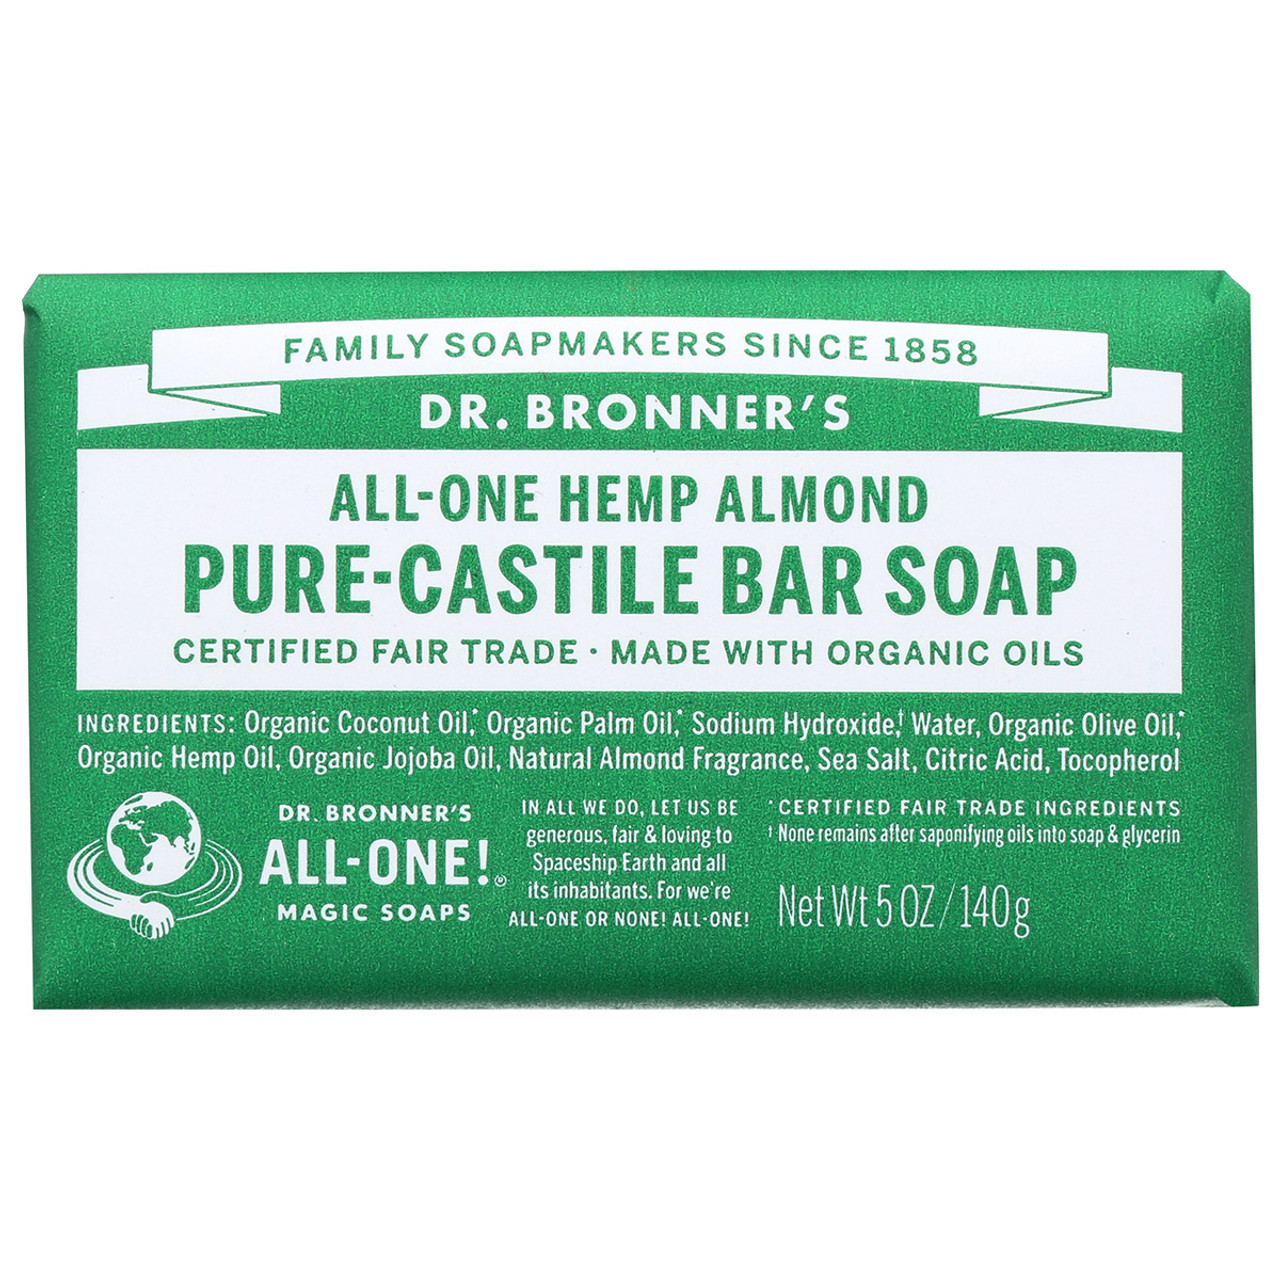 Almond Pure-Castile Bar Soap with Organic Ingredients